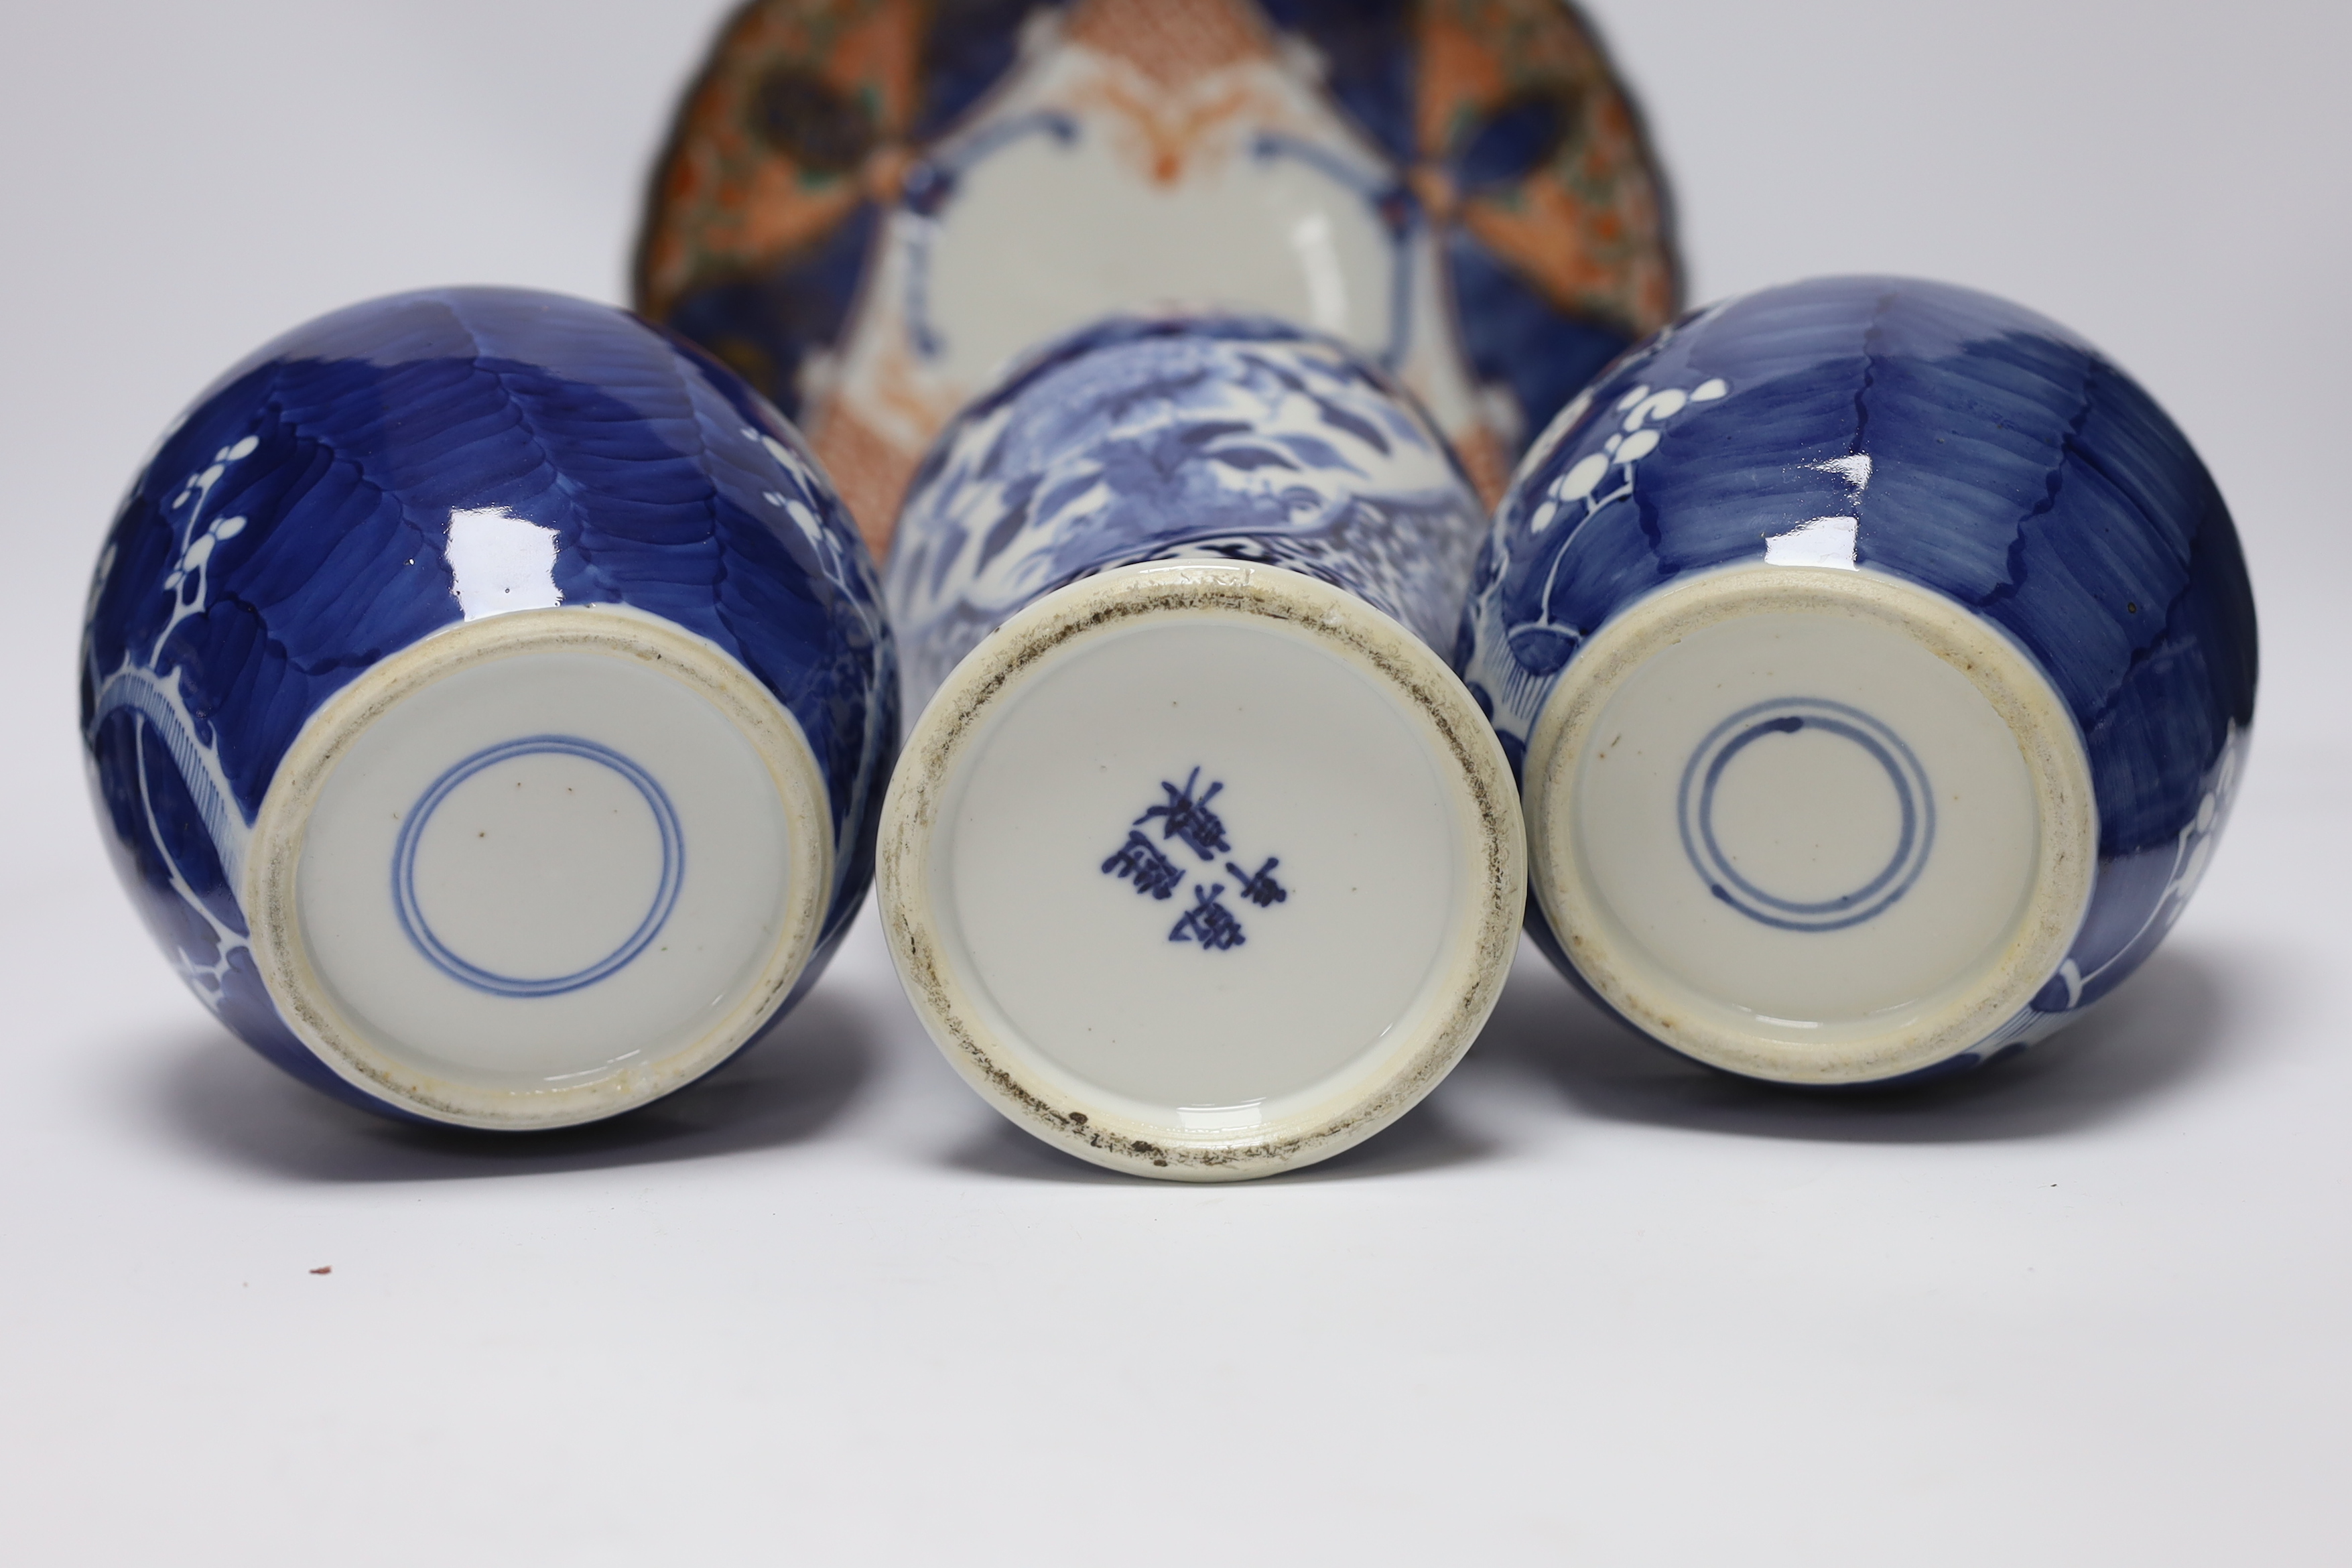 An early 20th century Chinese blue and white vase and cover, pair of 19th century Chinese famille rose dishes, four prunus jars, two covers, a Japanese Meiji period Imari dish and a small satsuma pot, some damage, talles